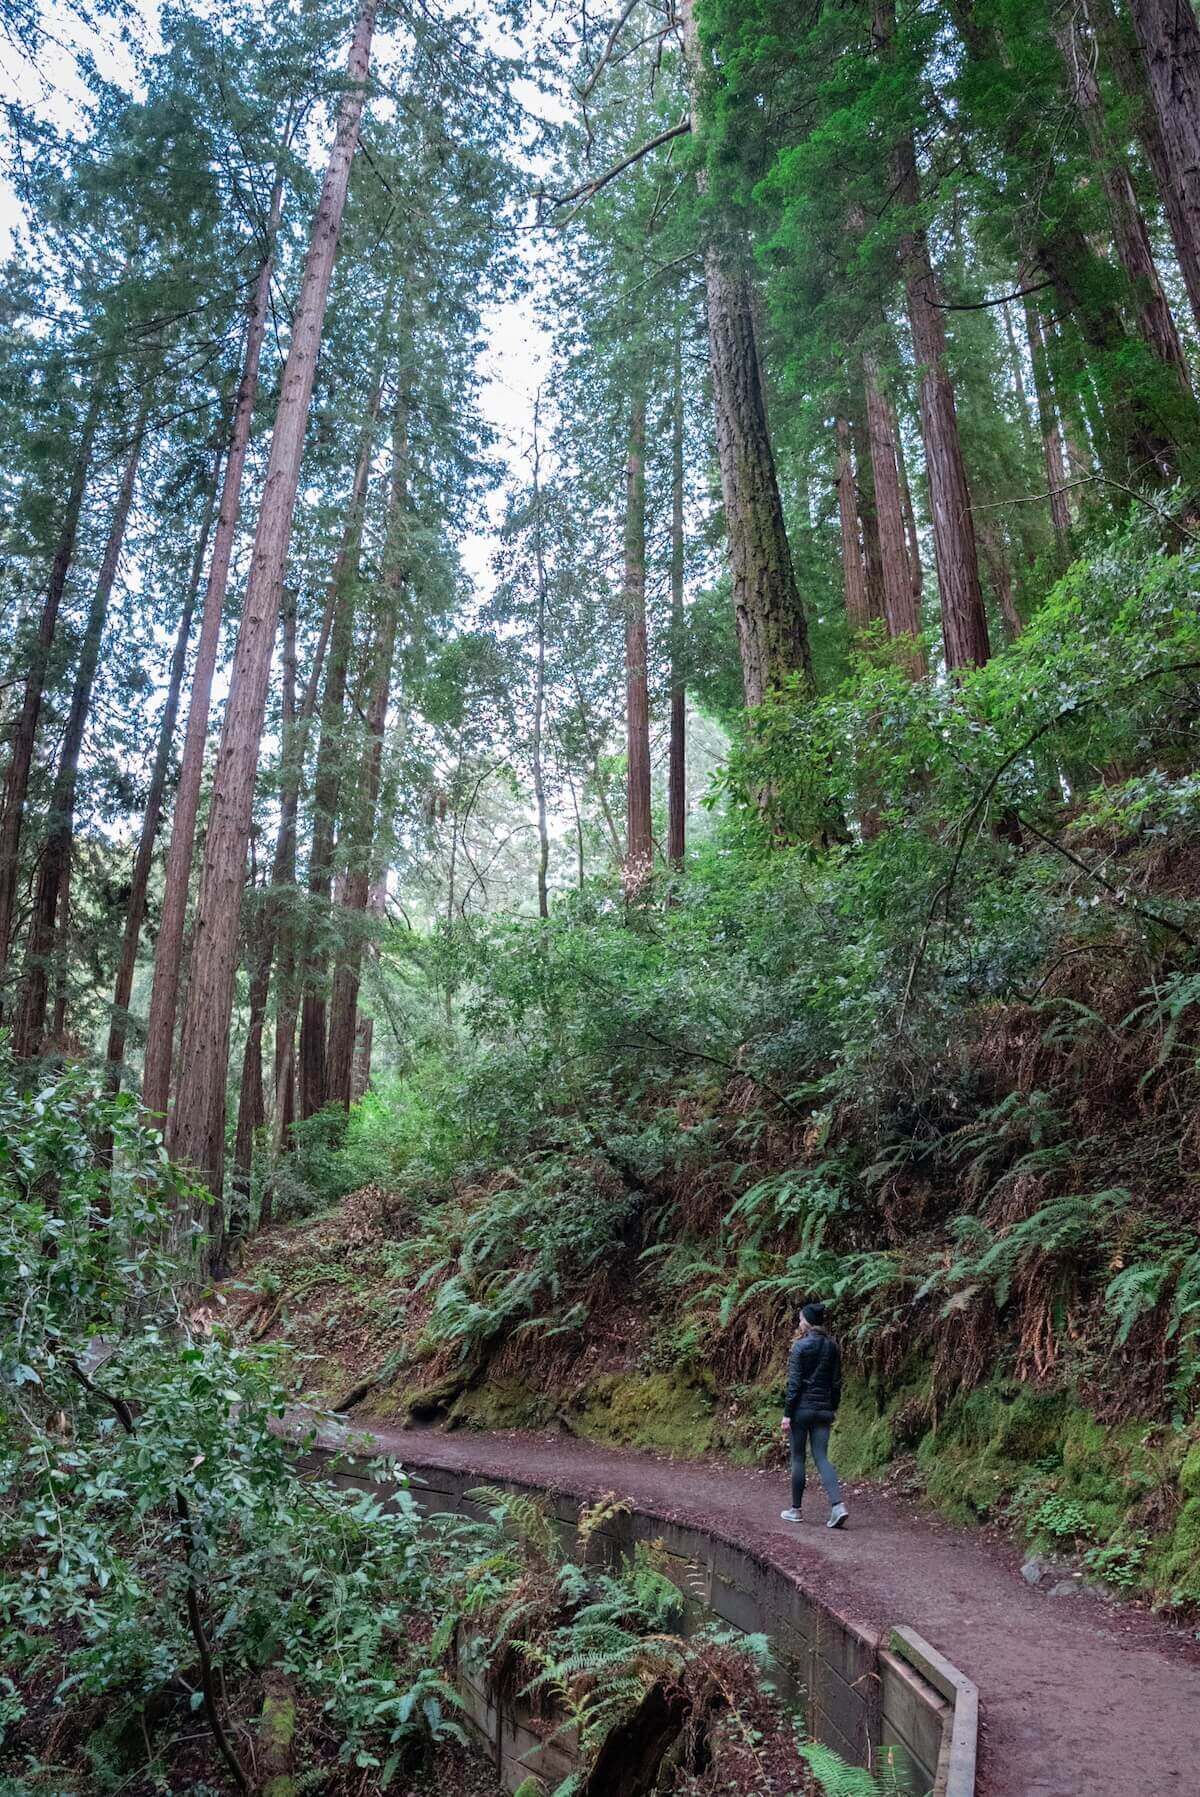 A female hiker in a dark clothing seen from behind and from a distance, walking along a dirt trail through a redwood forest.